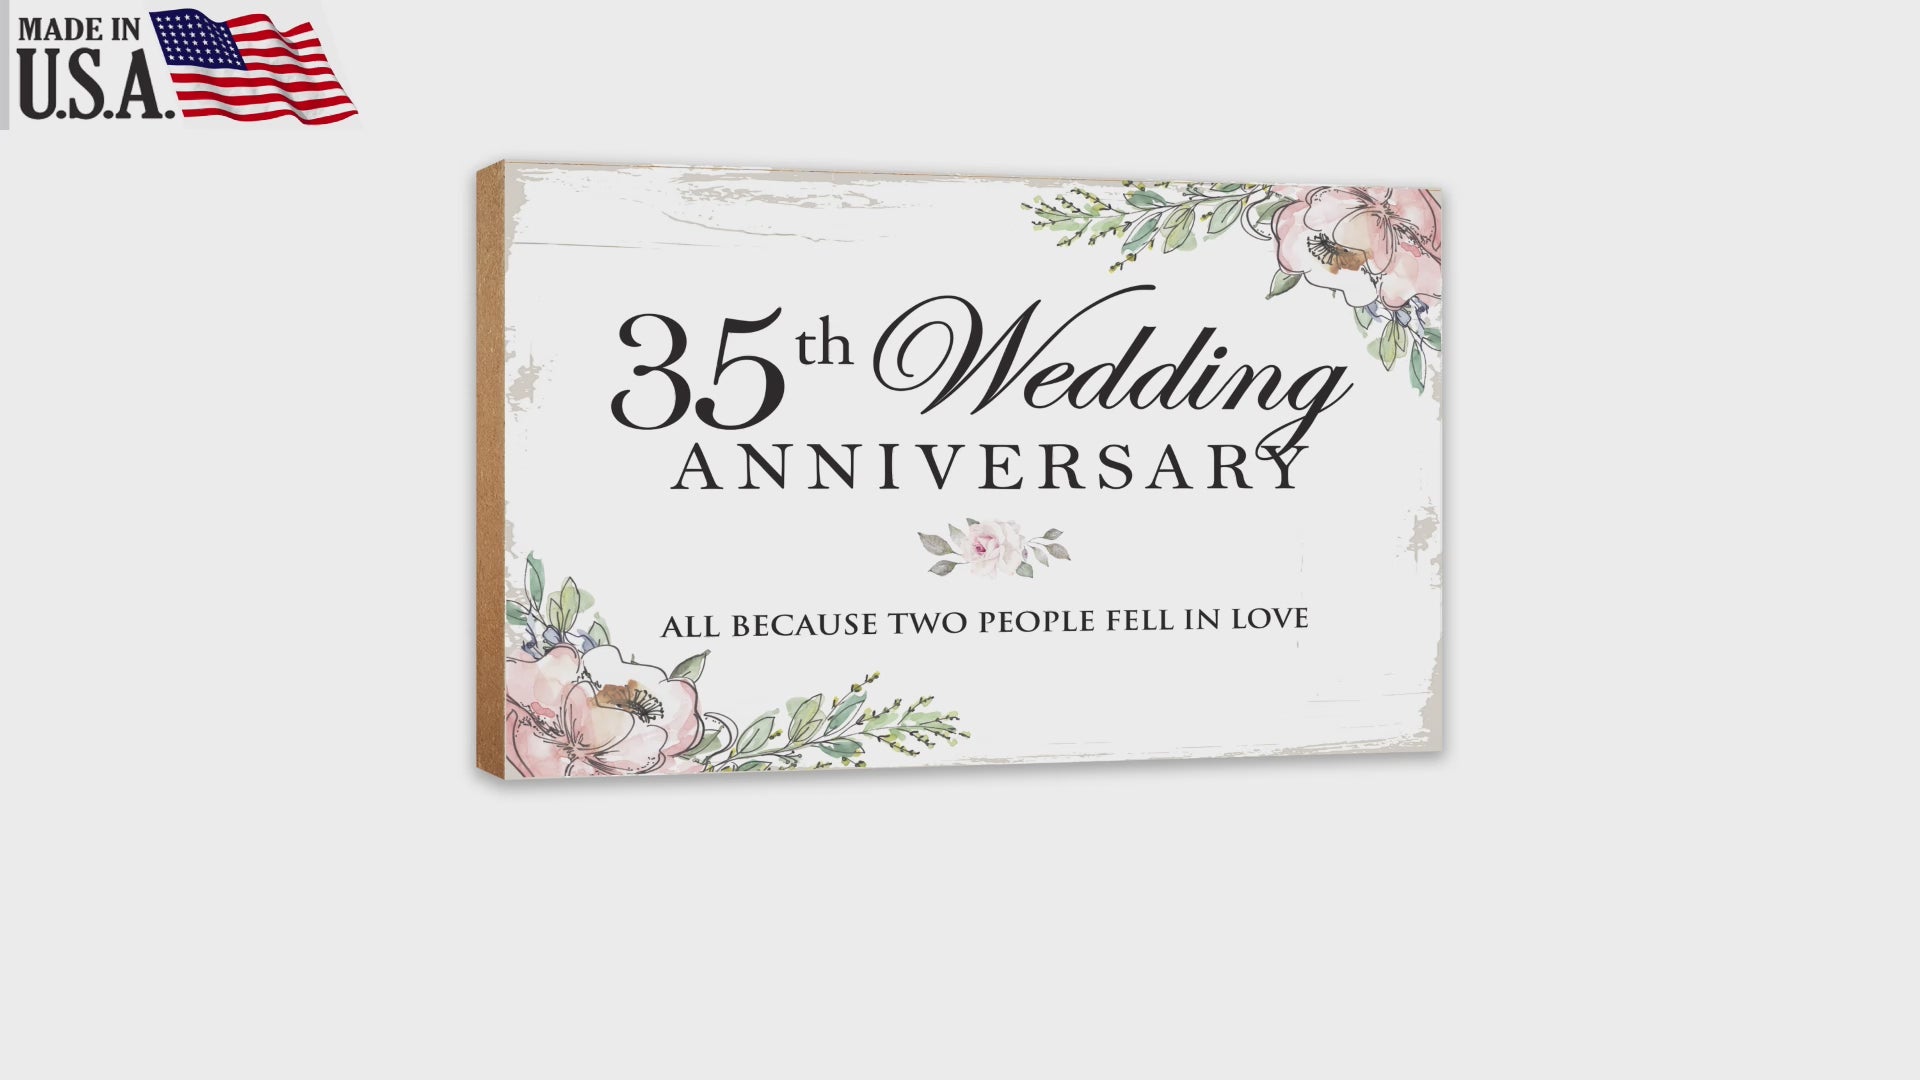 35th Wedding Anniversary Unique Shelf Decor and Tabletop Signs Gift for Couples - Fell in Love